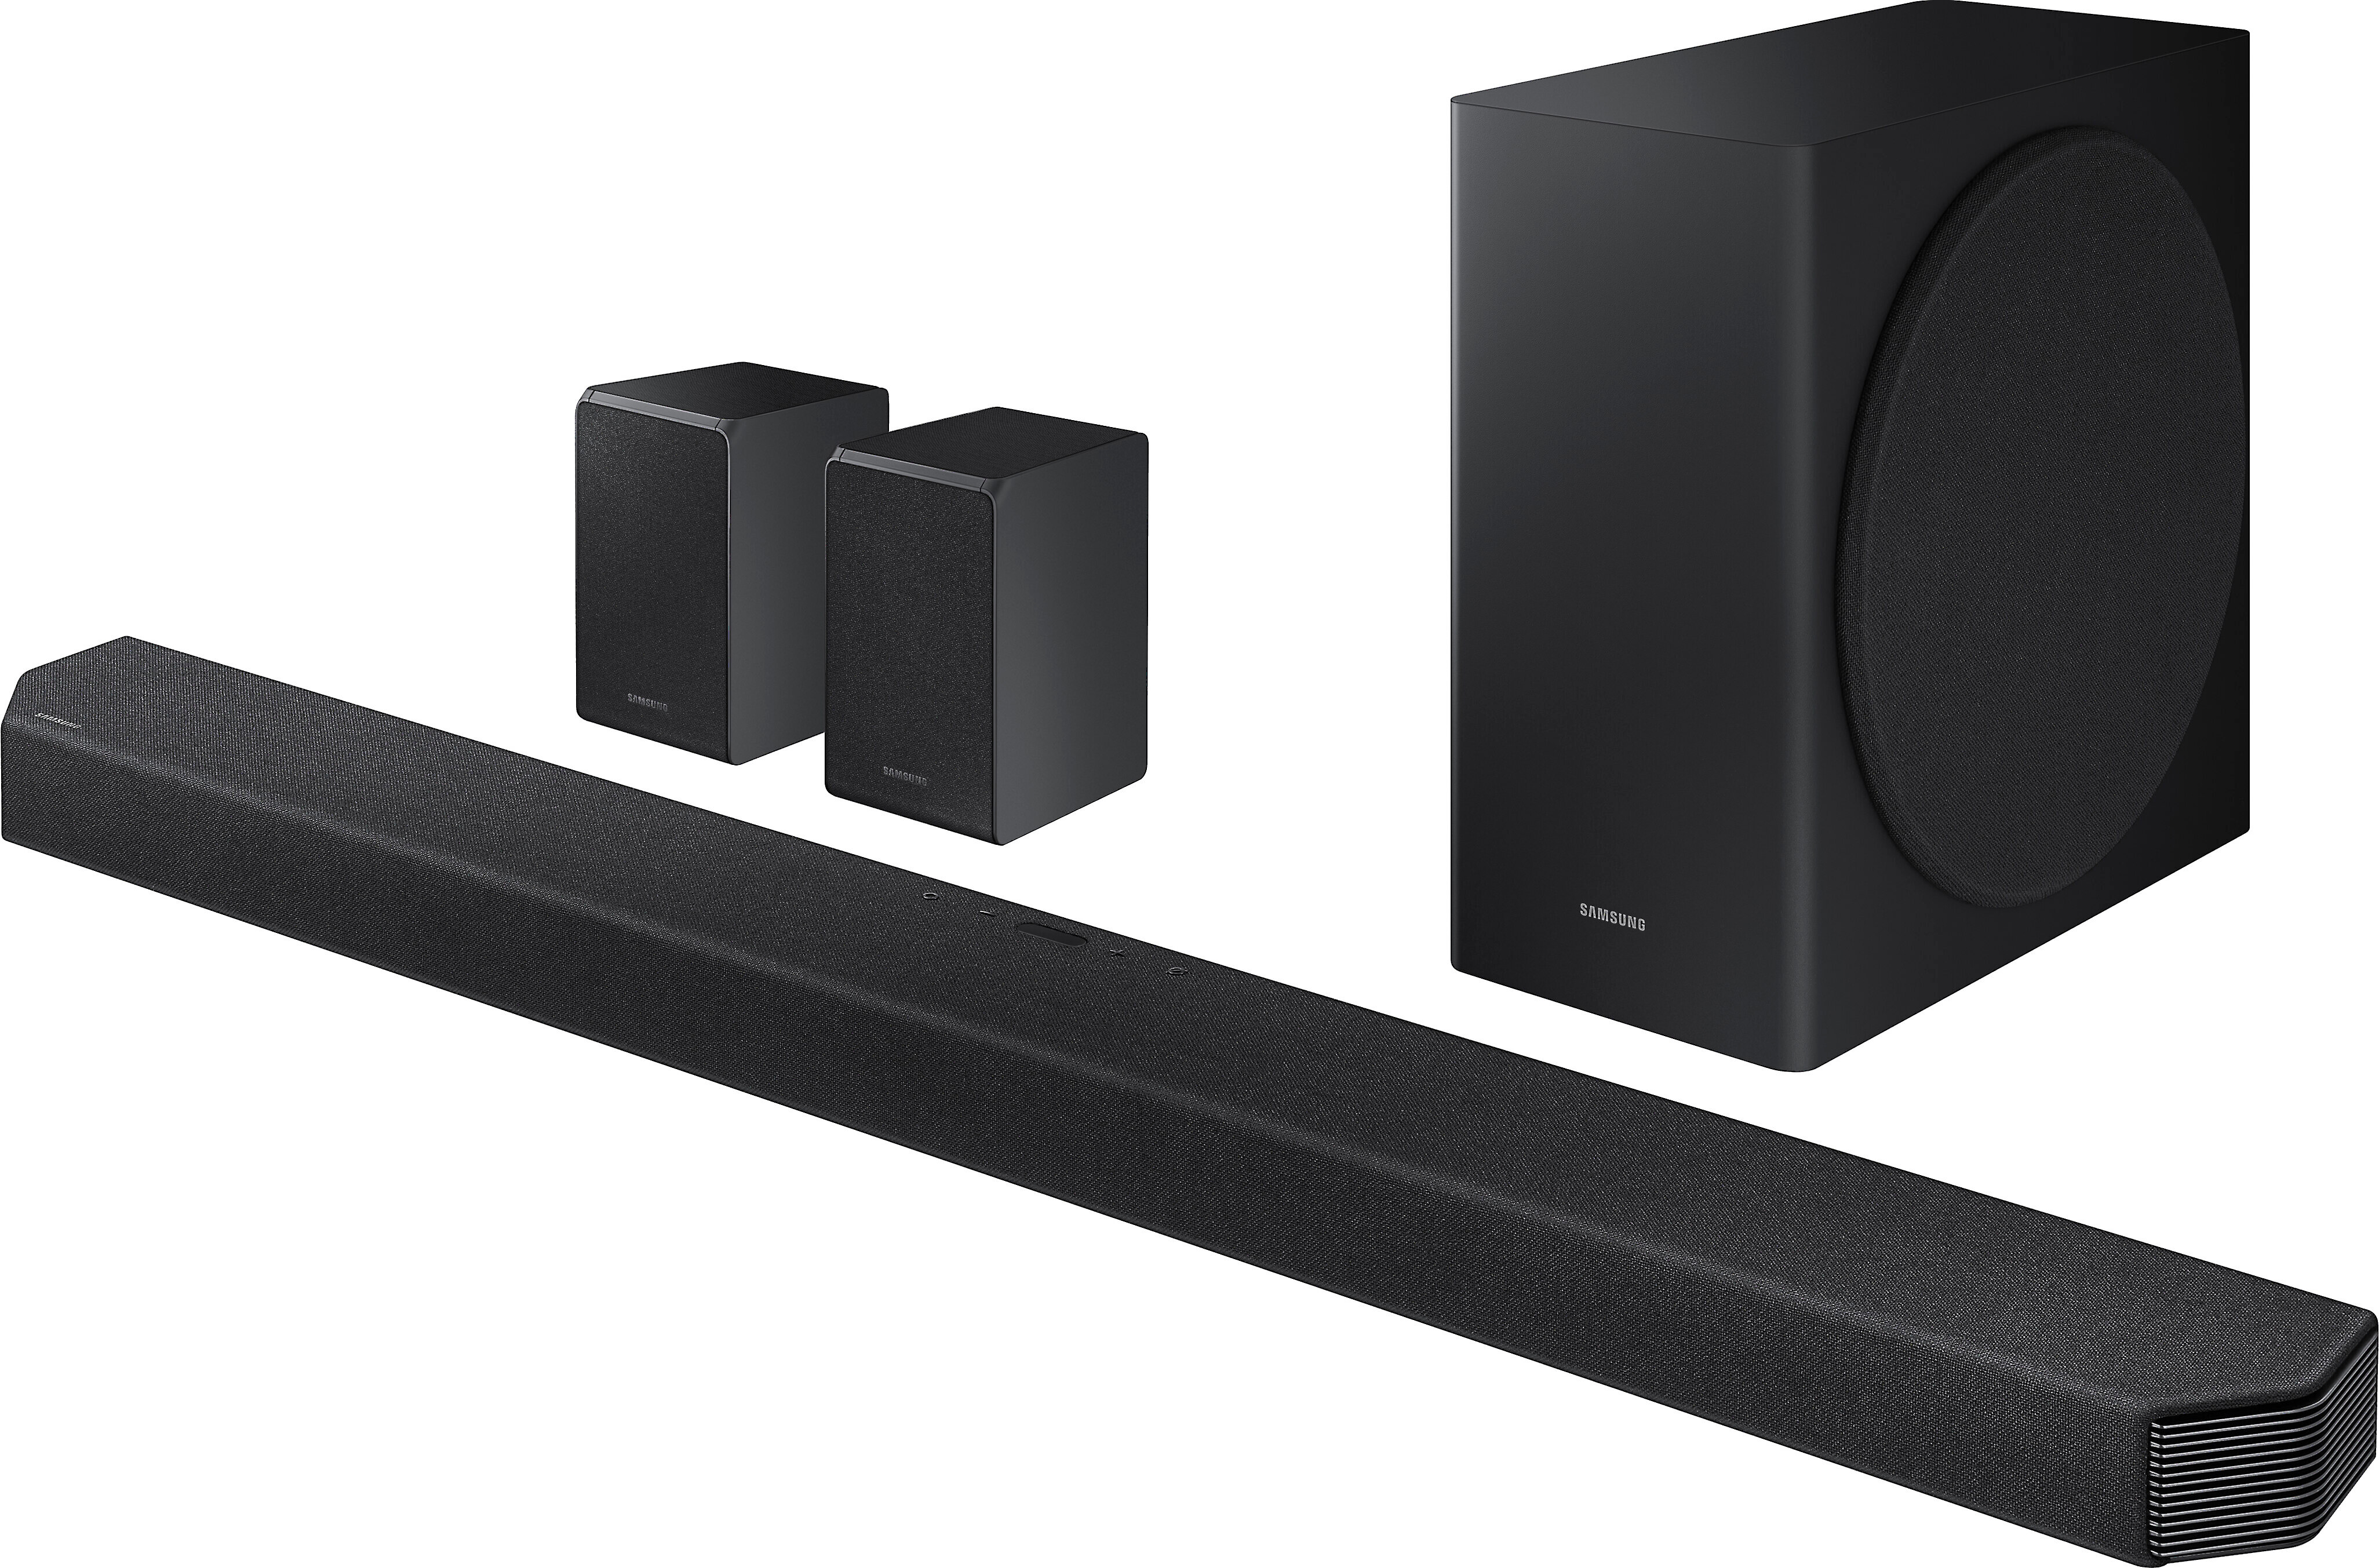 samsung 9.1 home theater system